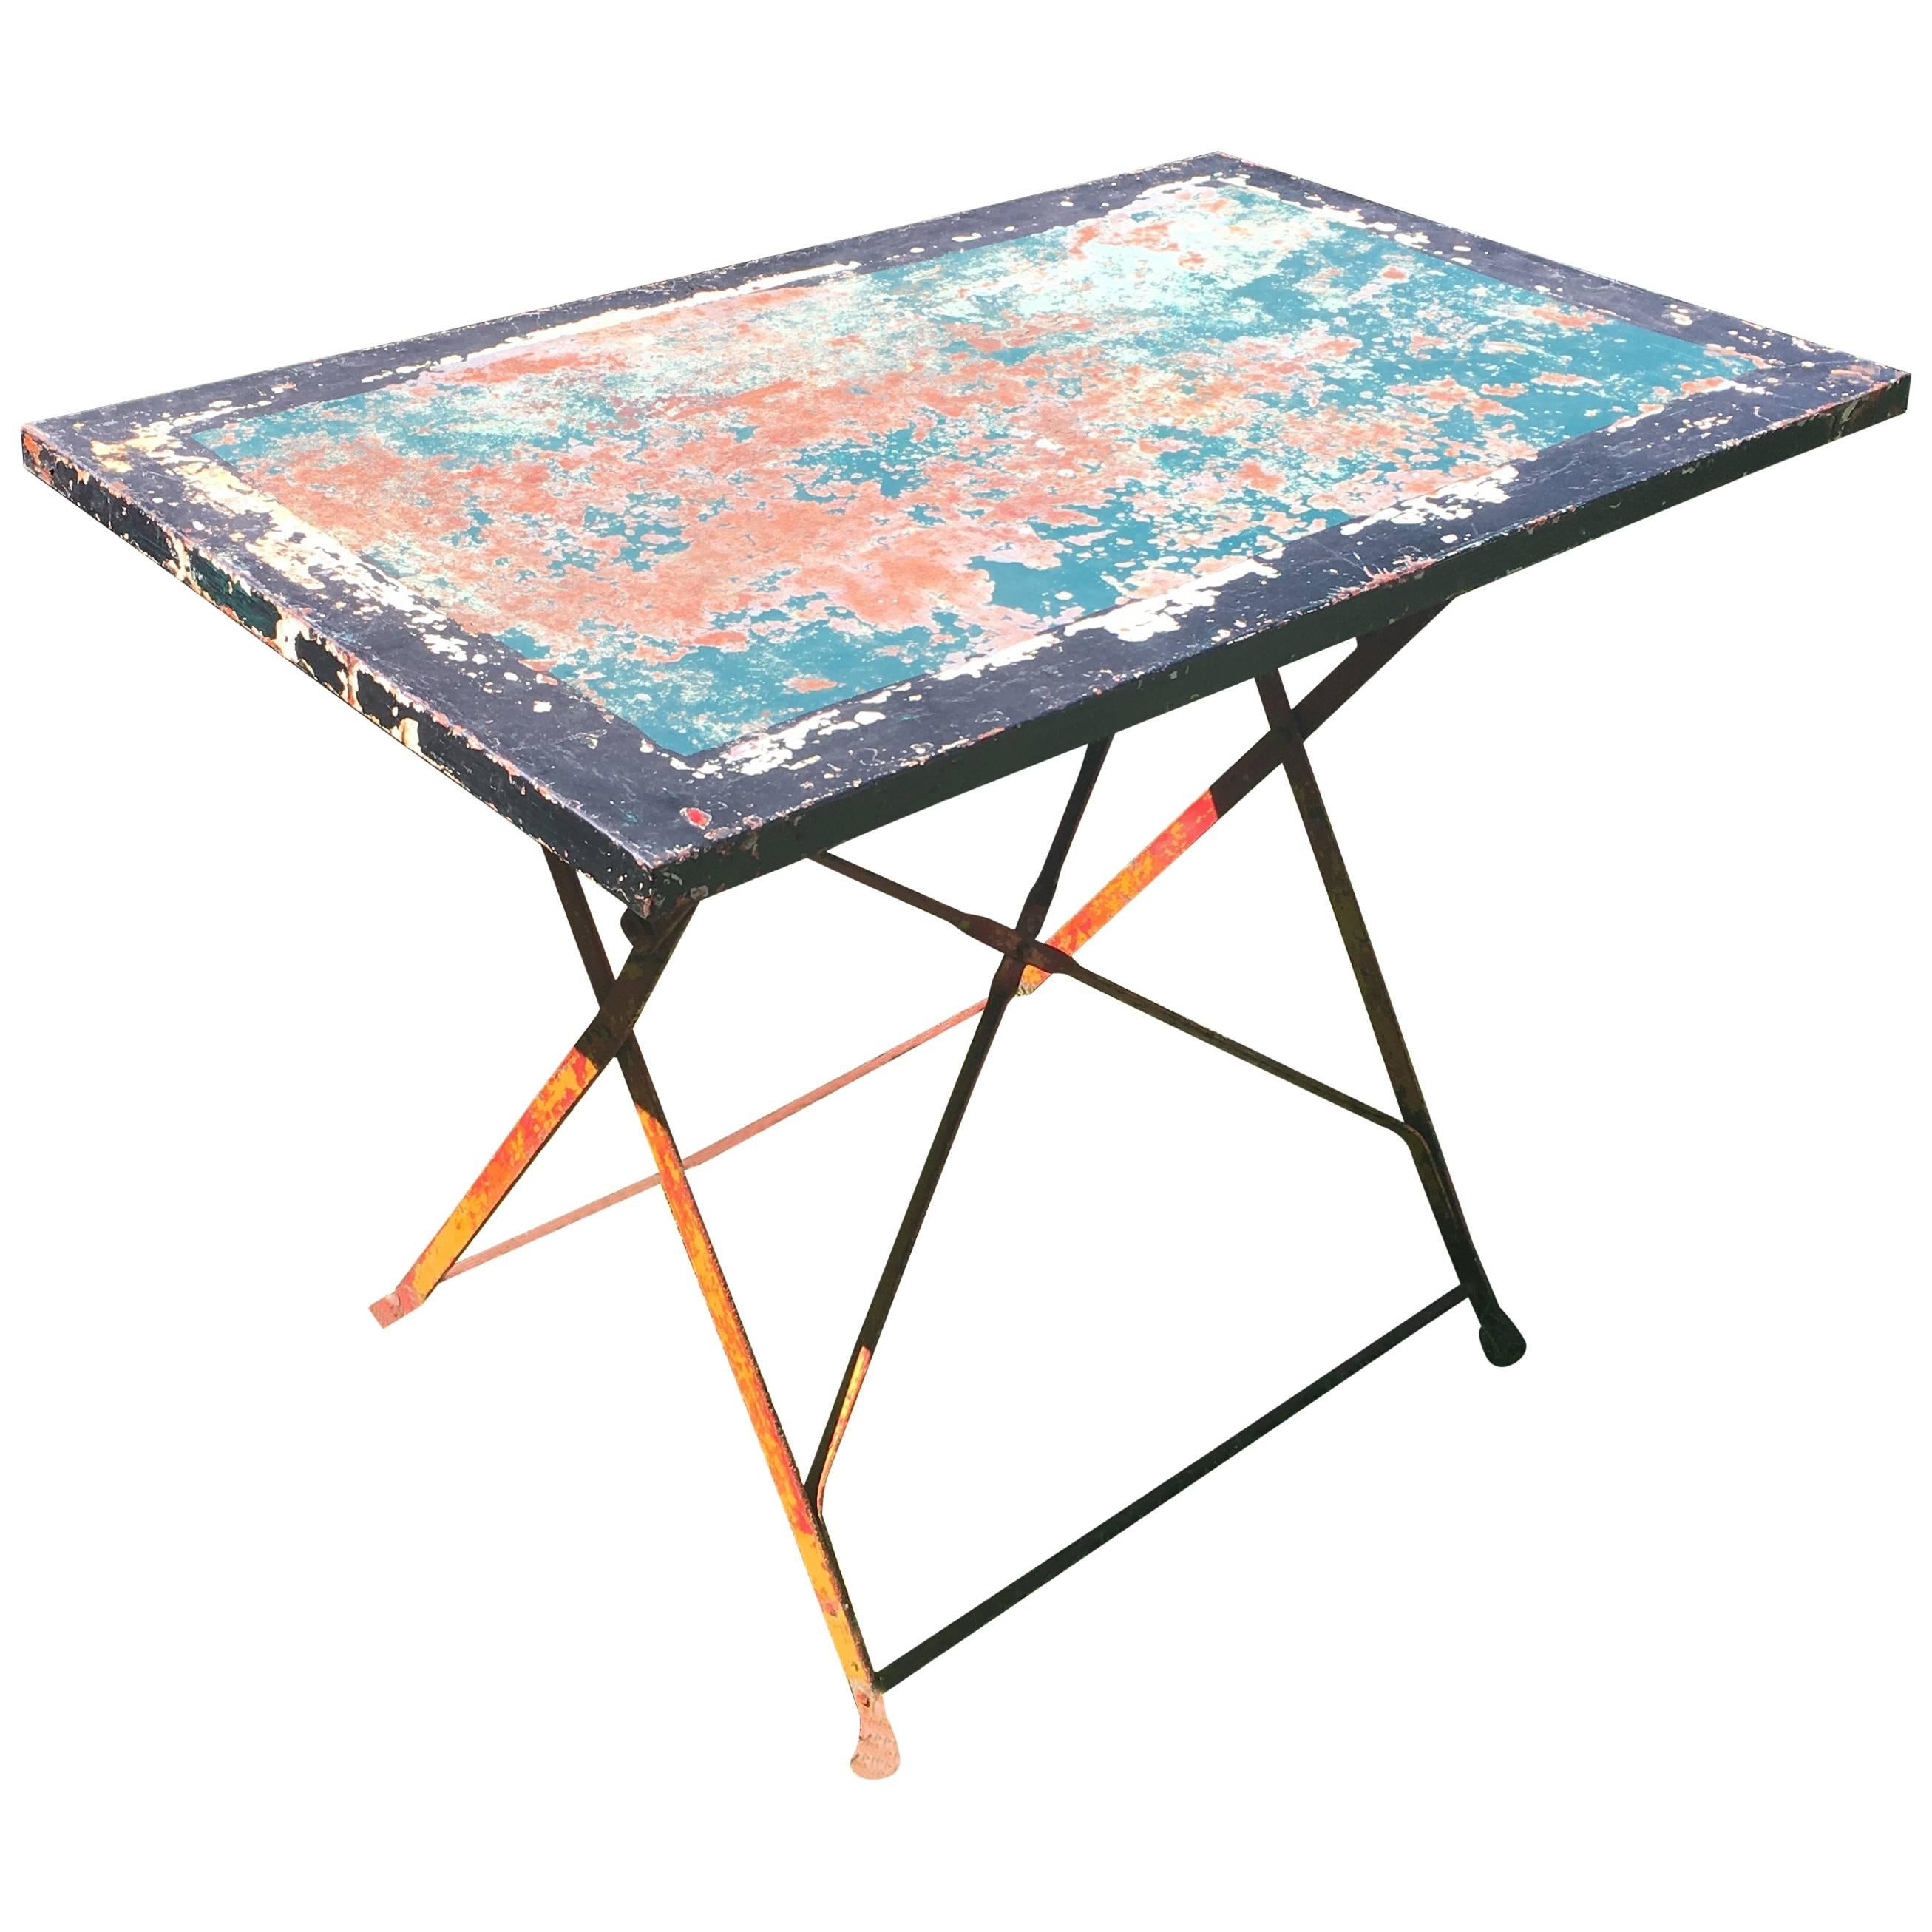 French Wrought and Sheet Iron Folding Garden Table in Original Paint